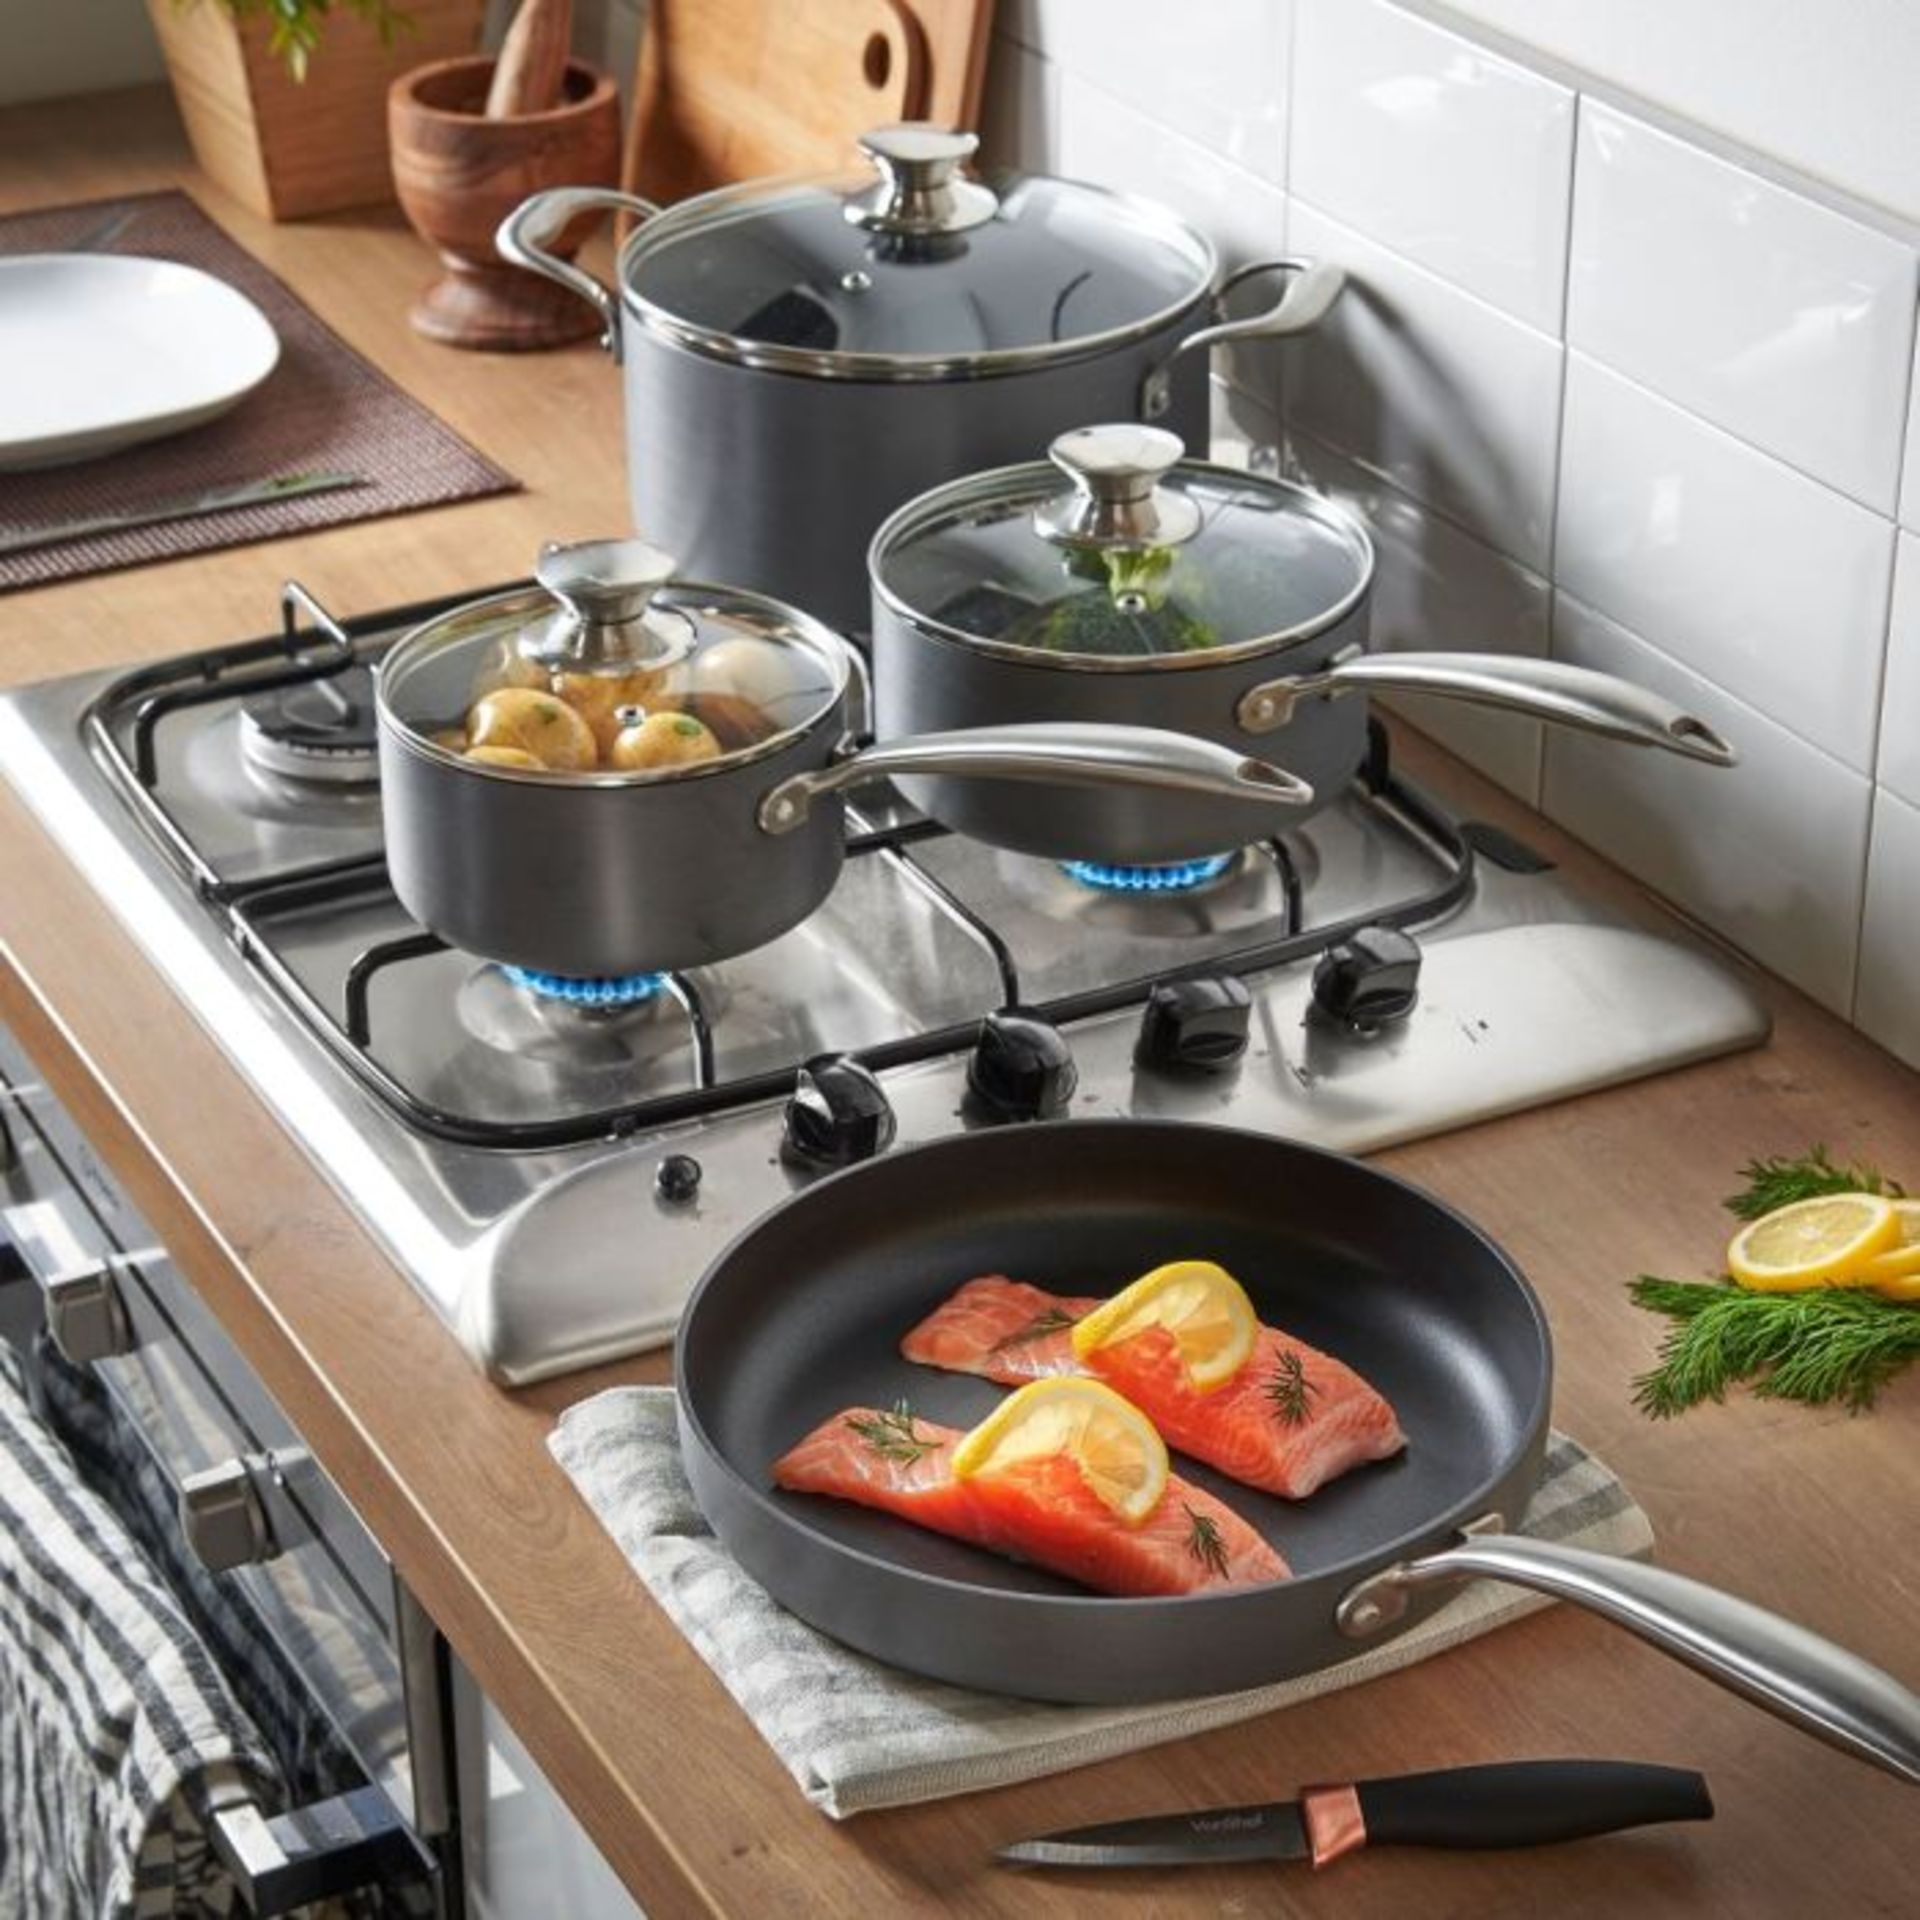 2x BRAND NEW 7 PIECE HARD ANODIZED PAN SETS. RRP £59.99 EACH. (R6-1) - Image 2 of 2